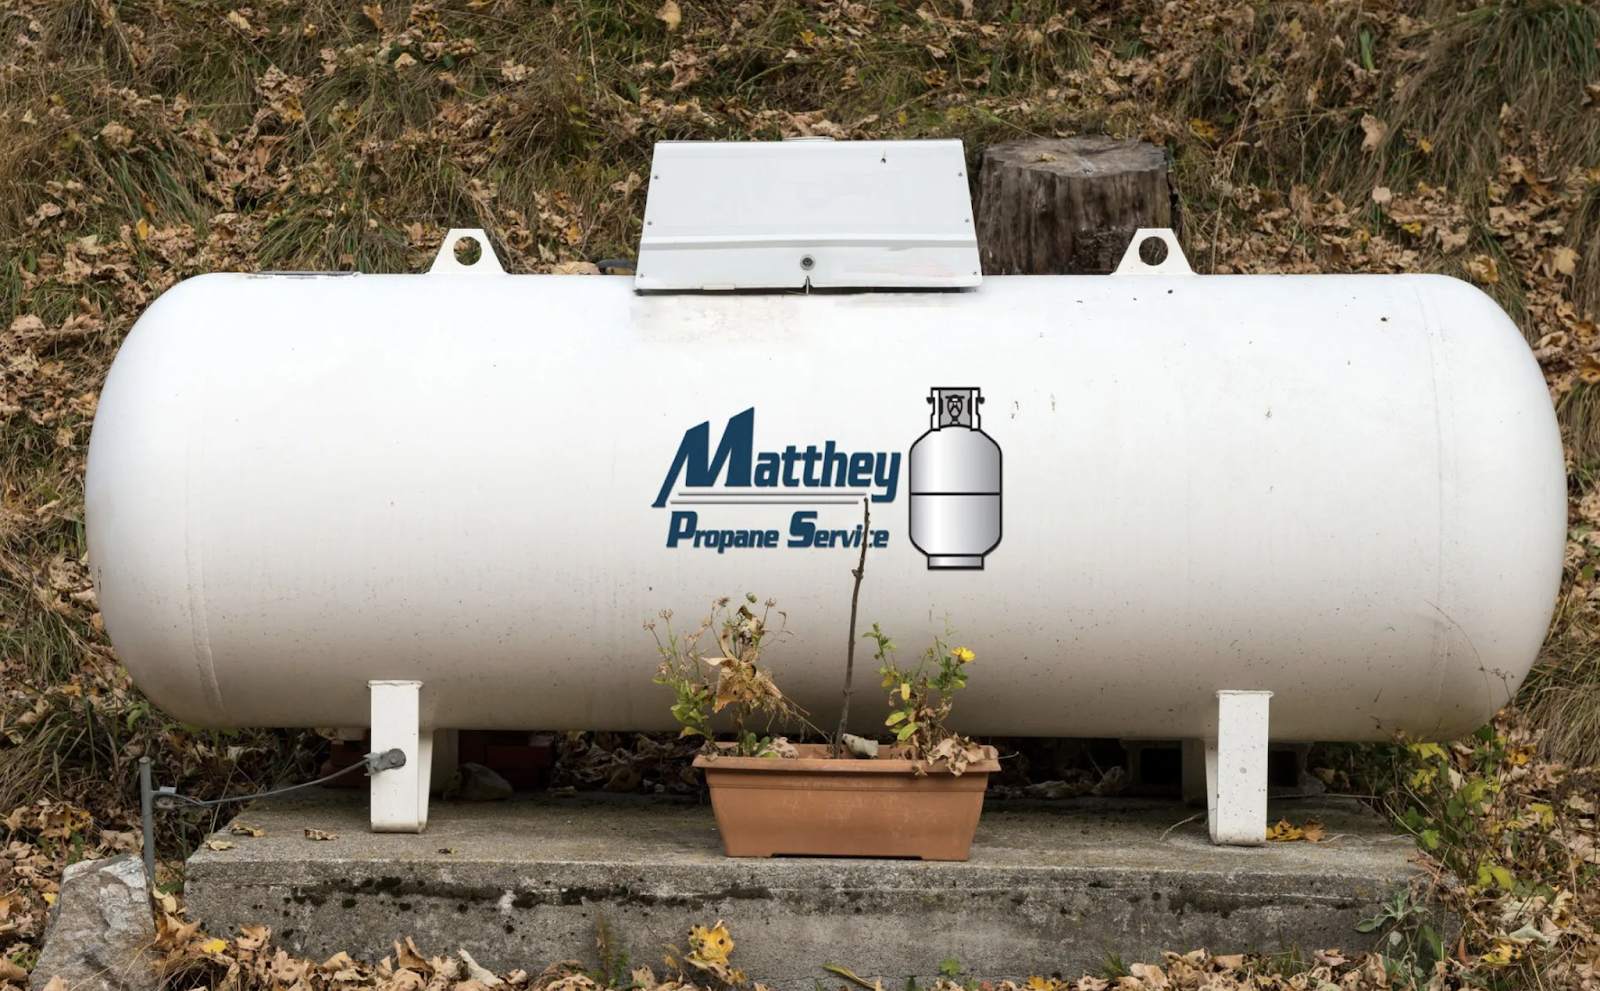 Matthey Propane is a company that offers propane delivery service in Camden, New Jersey, for homes, businesses, and recreational vehicles.